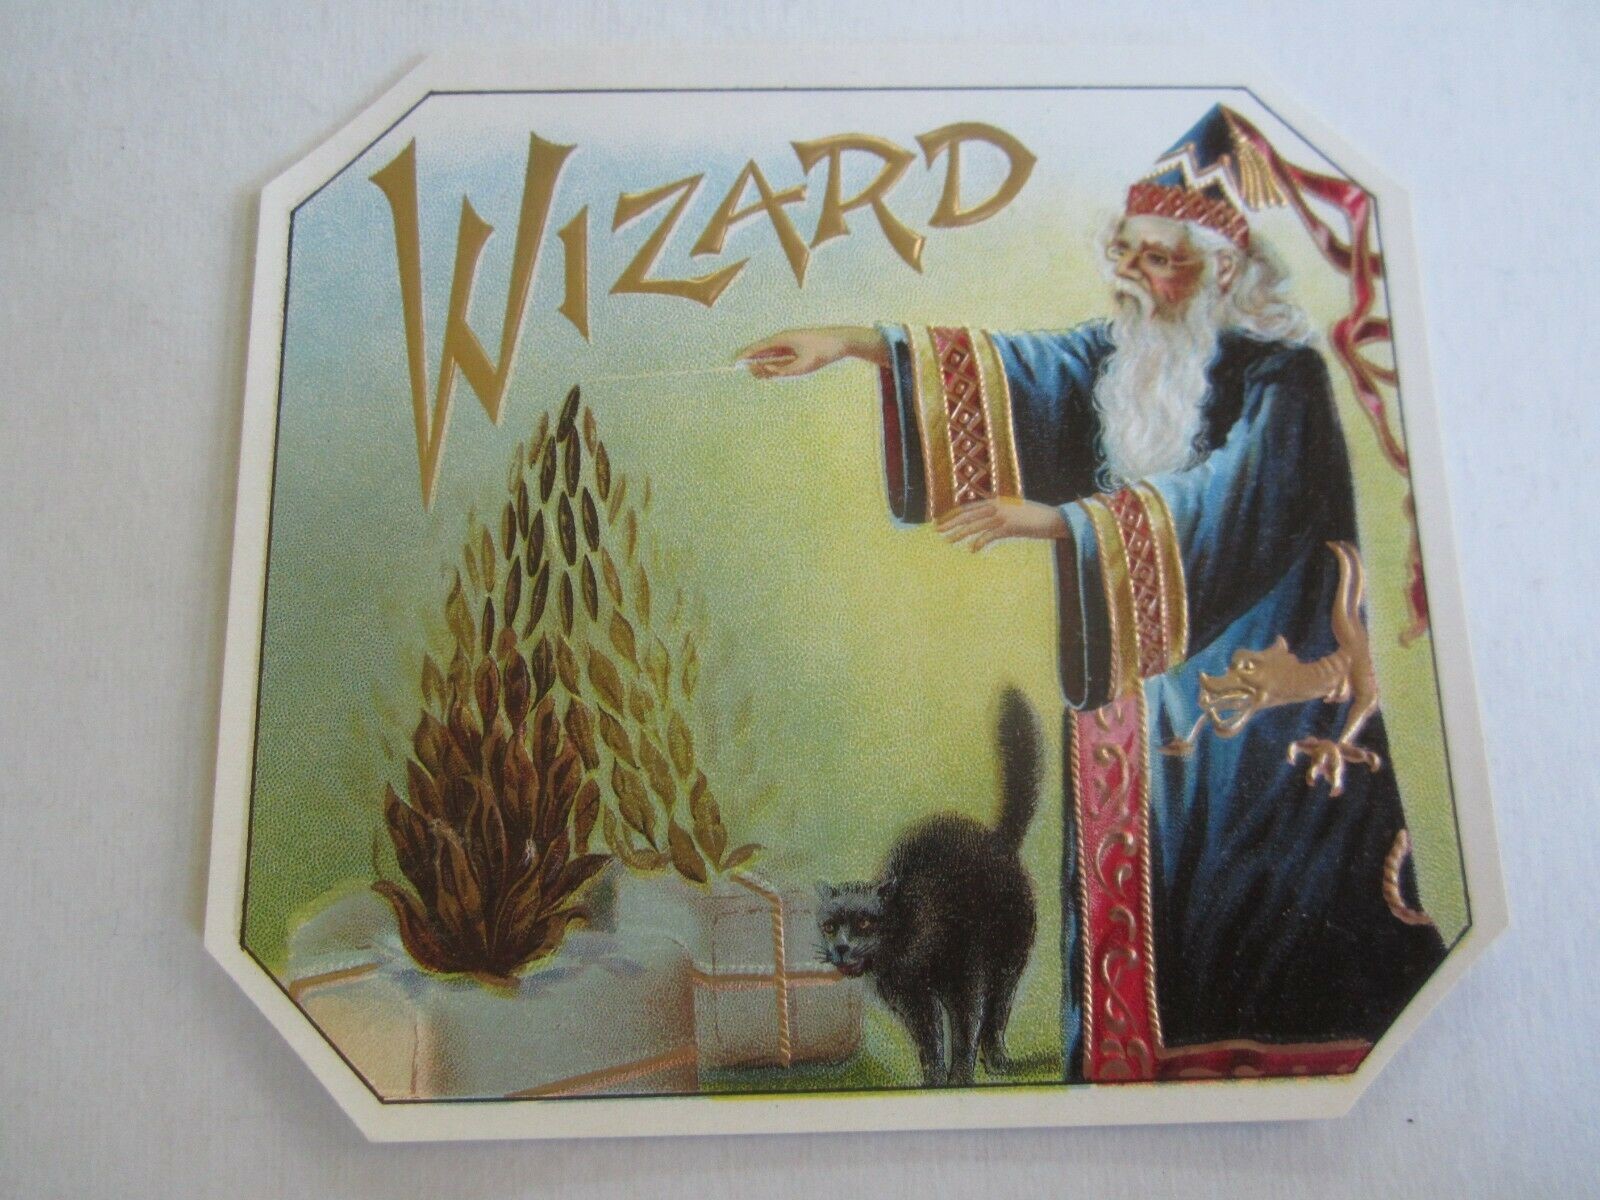  Old Antique - WIZARD - Outer CIGAR LABEL - MAG...